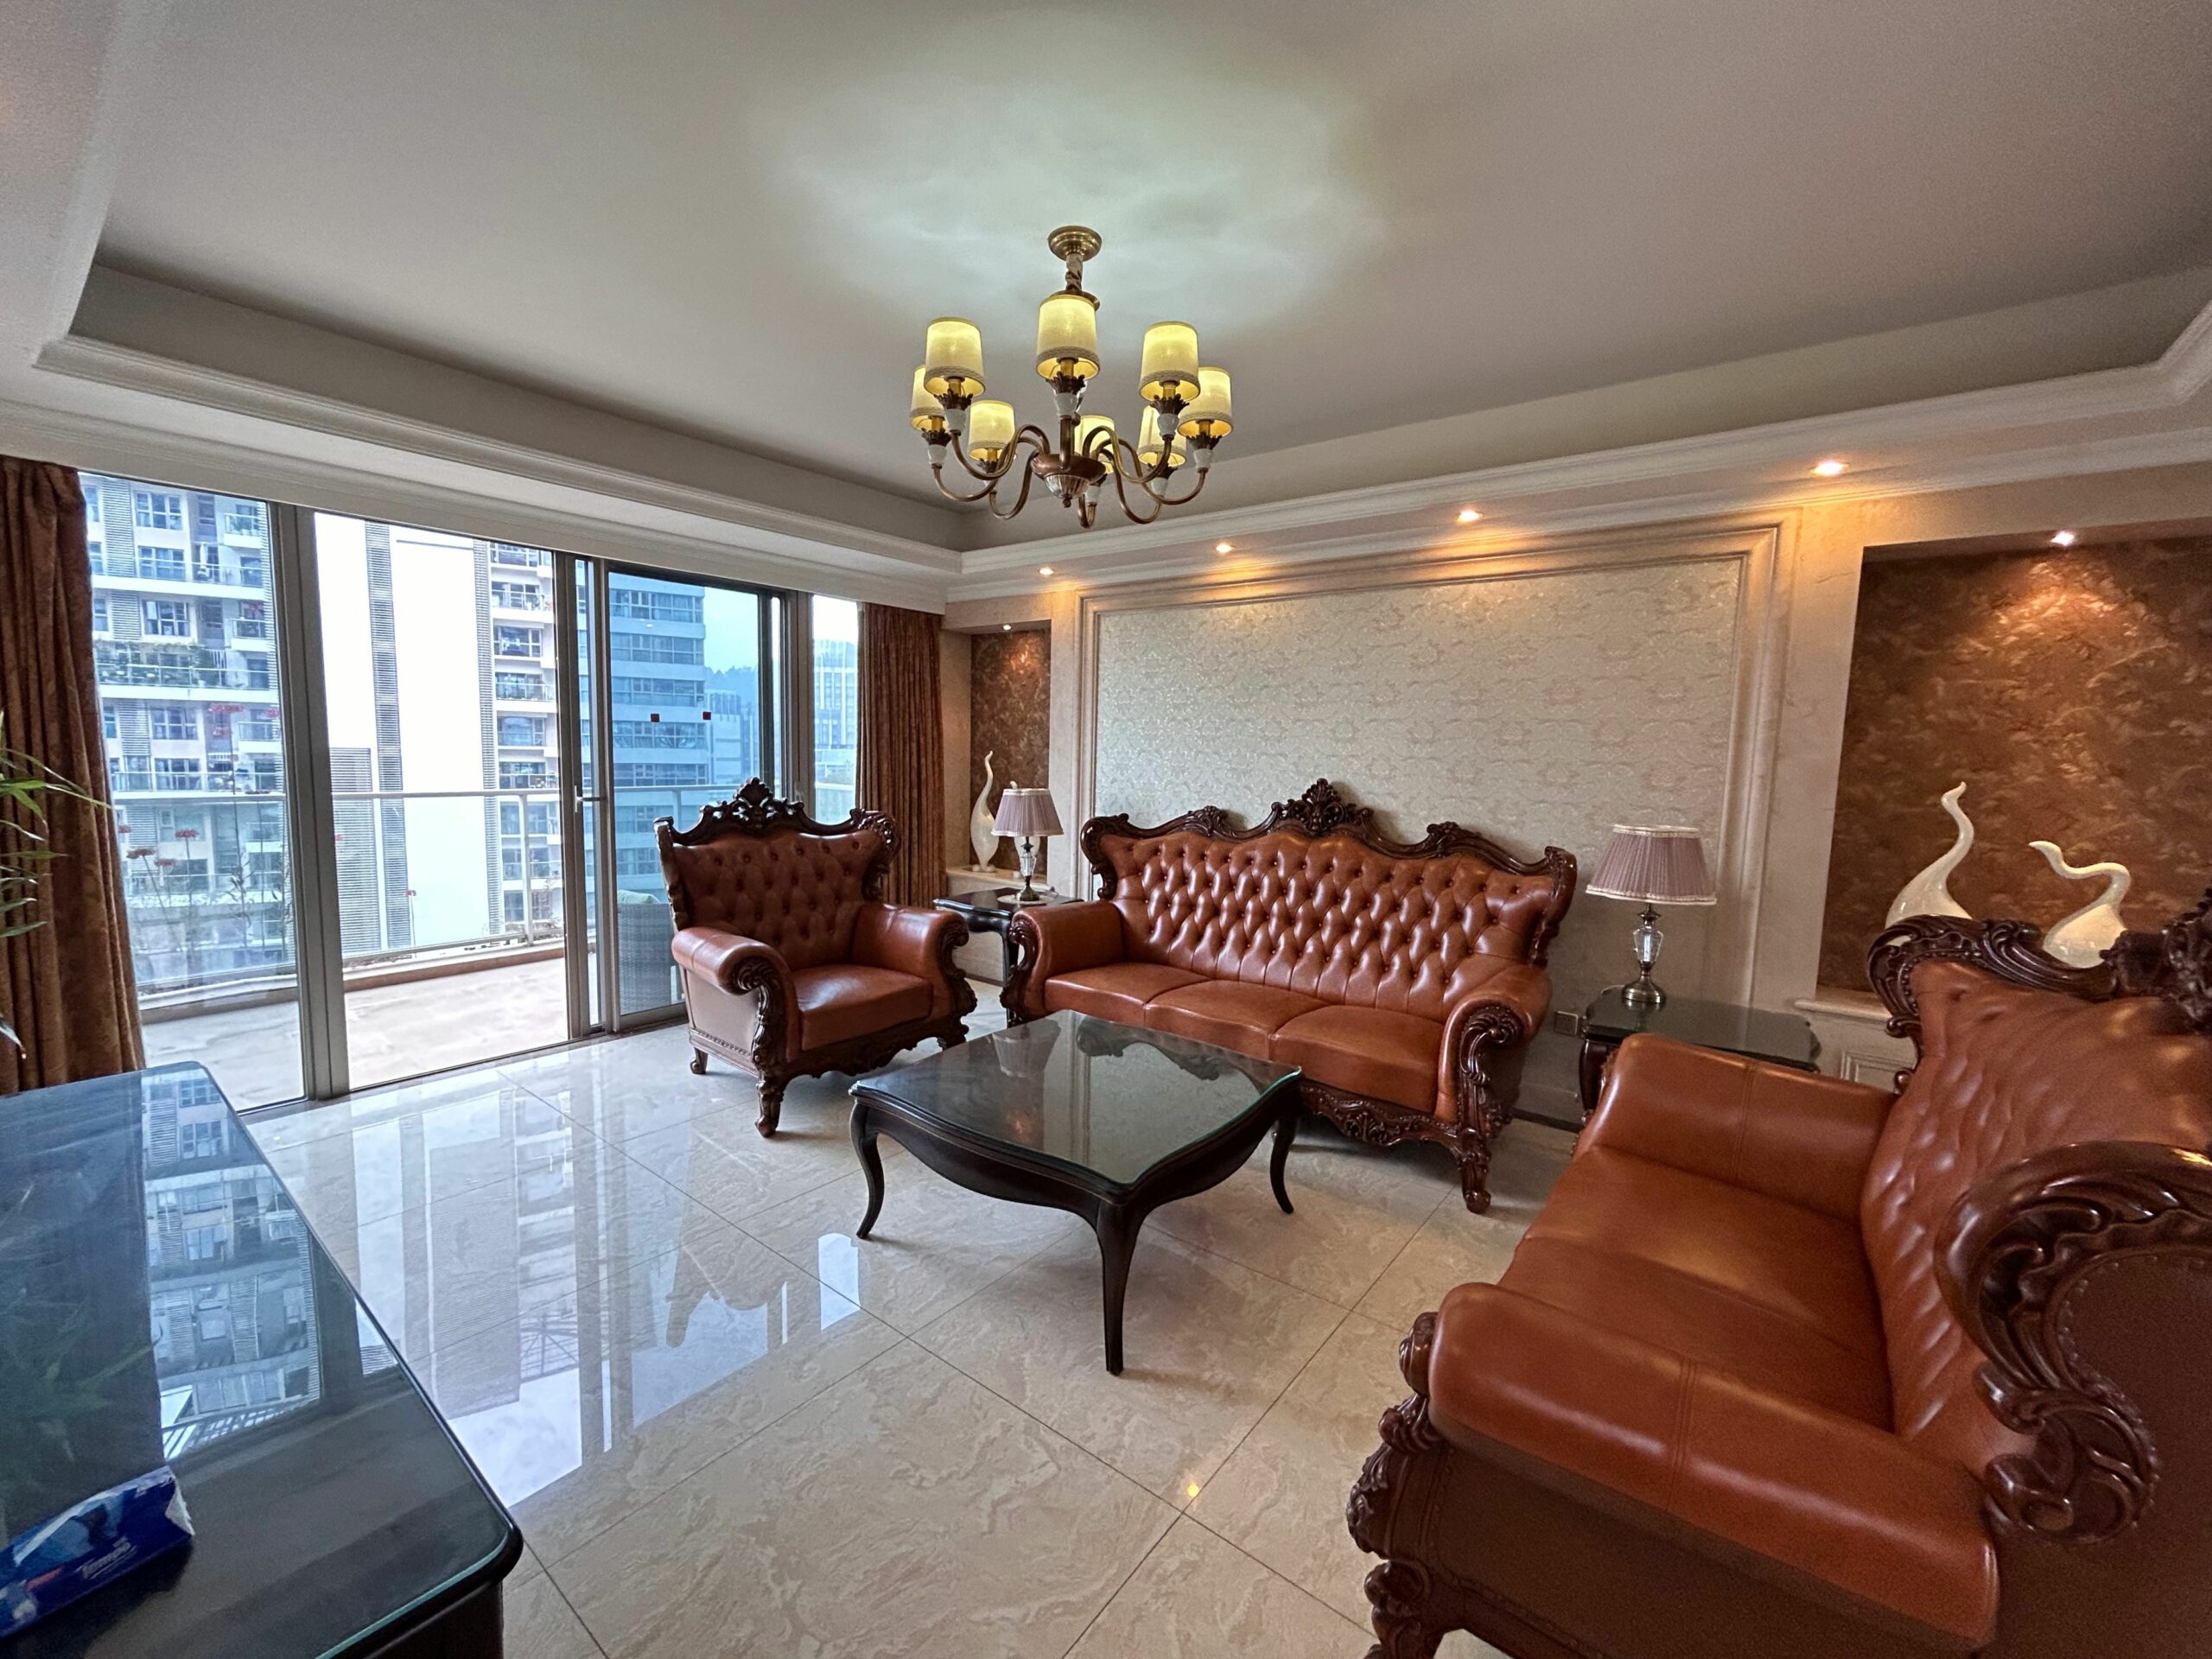 Featured image for “Mont Orchid 2 180 square meter 4-bedroom balcony, well decorated and maintained, ready for viewing at any time”